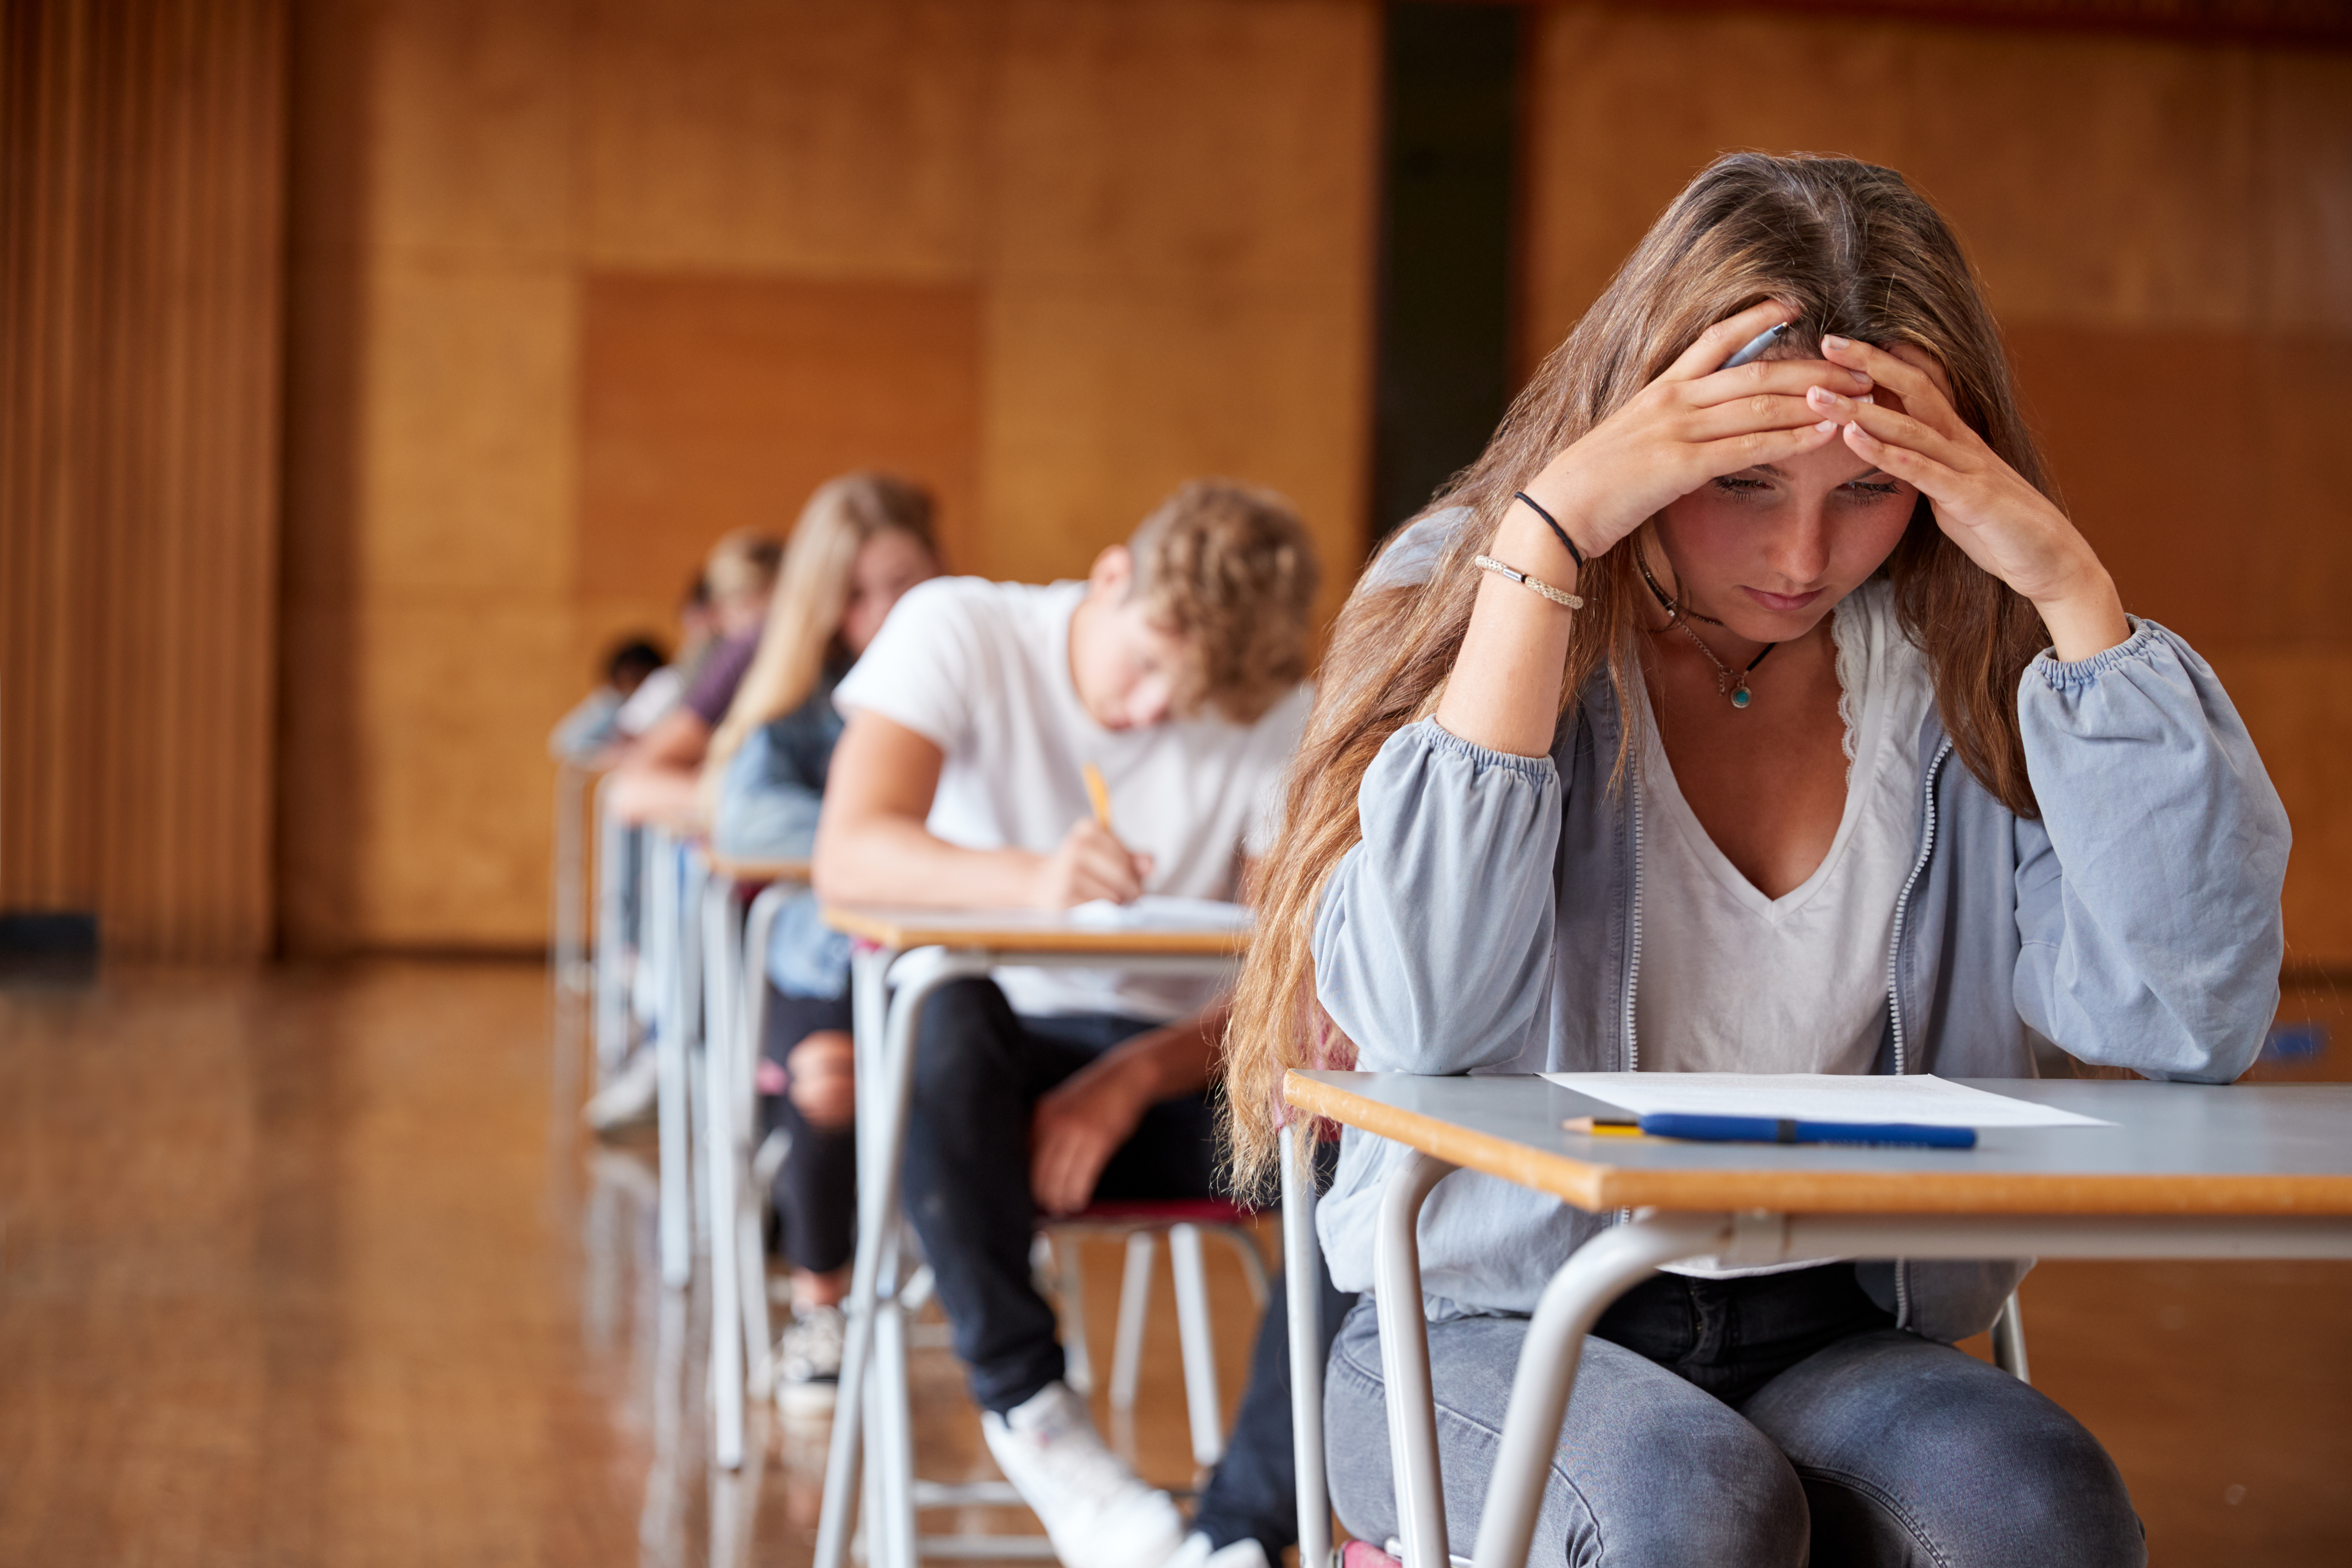 A stressed girl sitting in an examination hall with other students | Source: Shutterstock